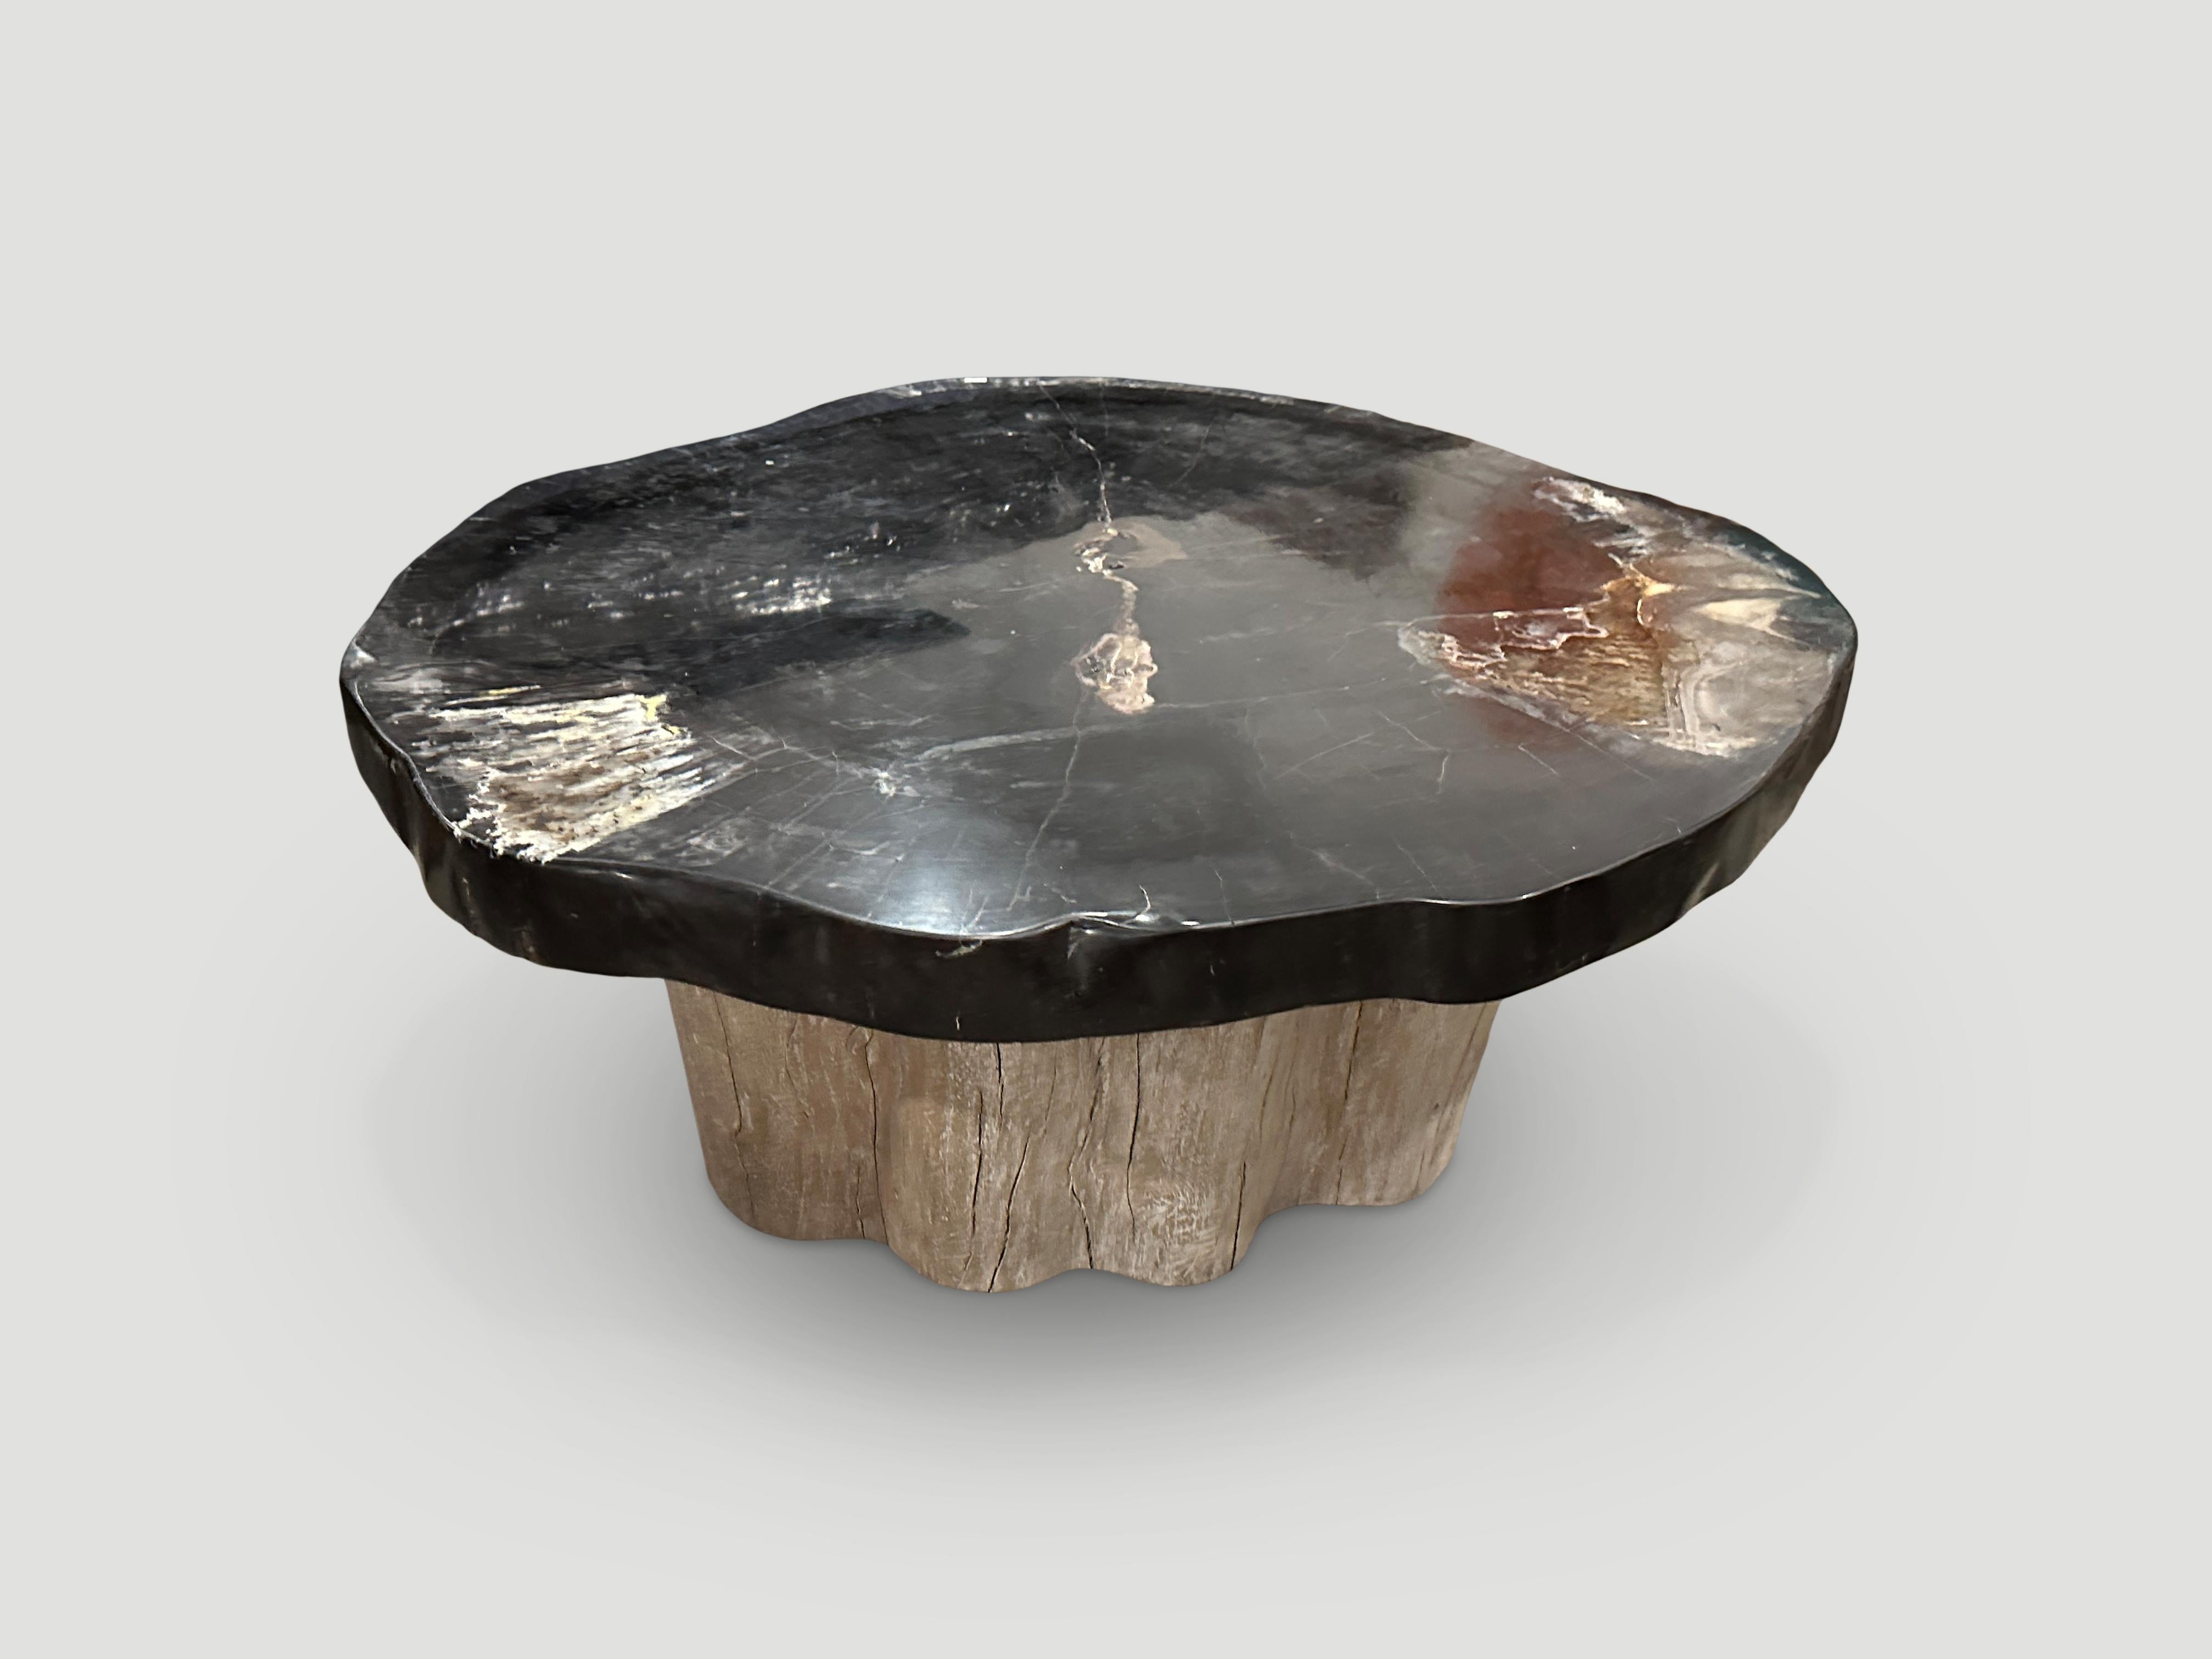 Impressive two and a half inch thick, high quality petrified wood coffee table, resting on an organic white washed teak base. It’s fascinating how Mother Nature produces these stunning 40 million year old petrified teak logs with such contrasting